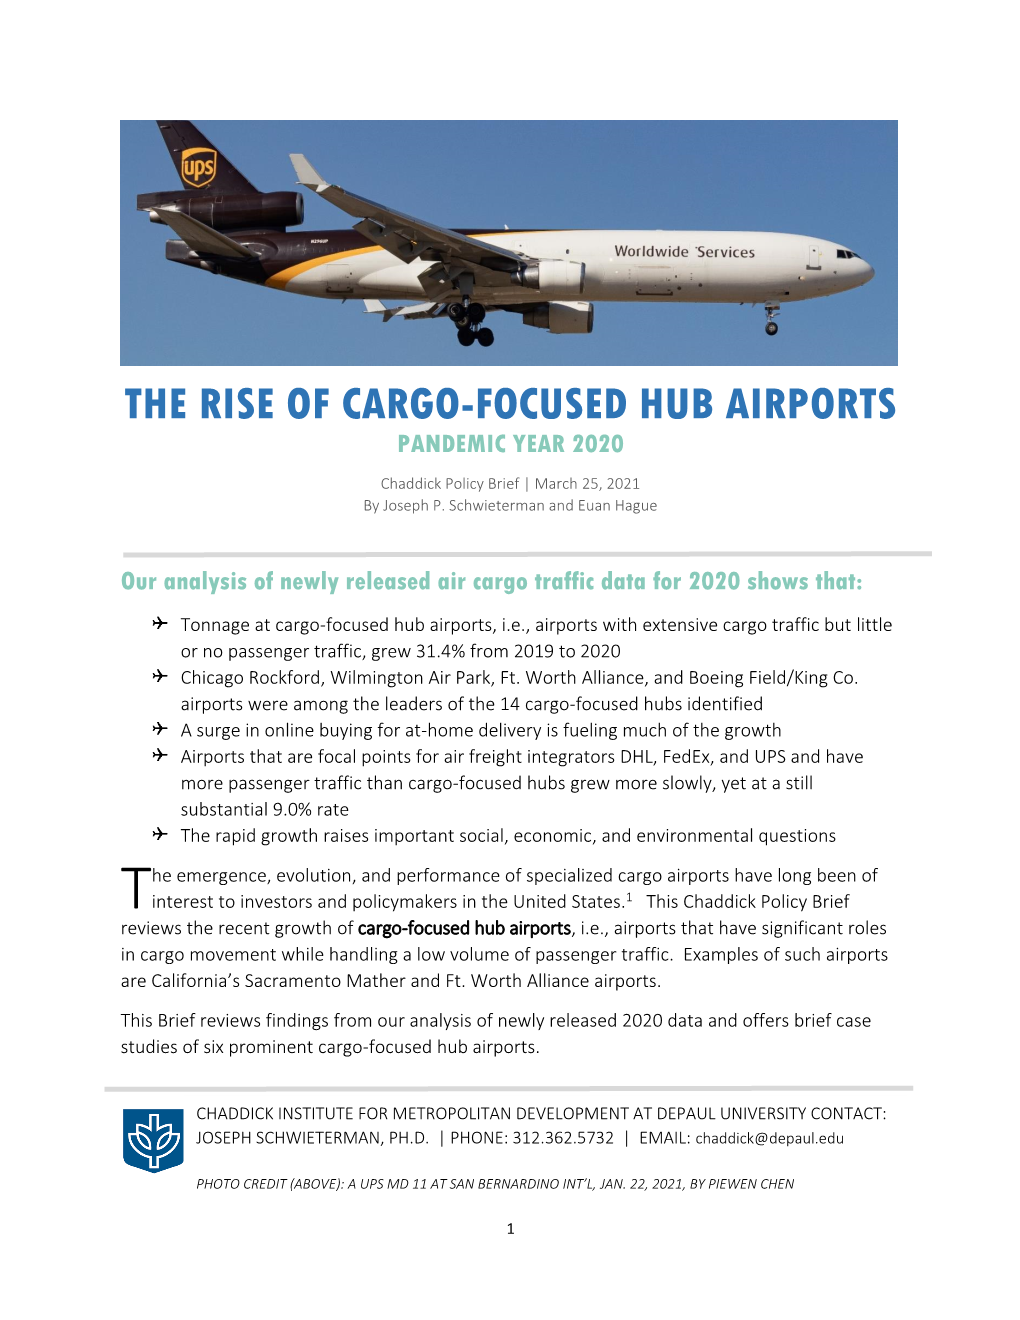 The Rise of Cargo-Focused Hub Airports Pandemic Year 2020